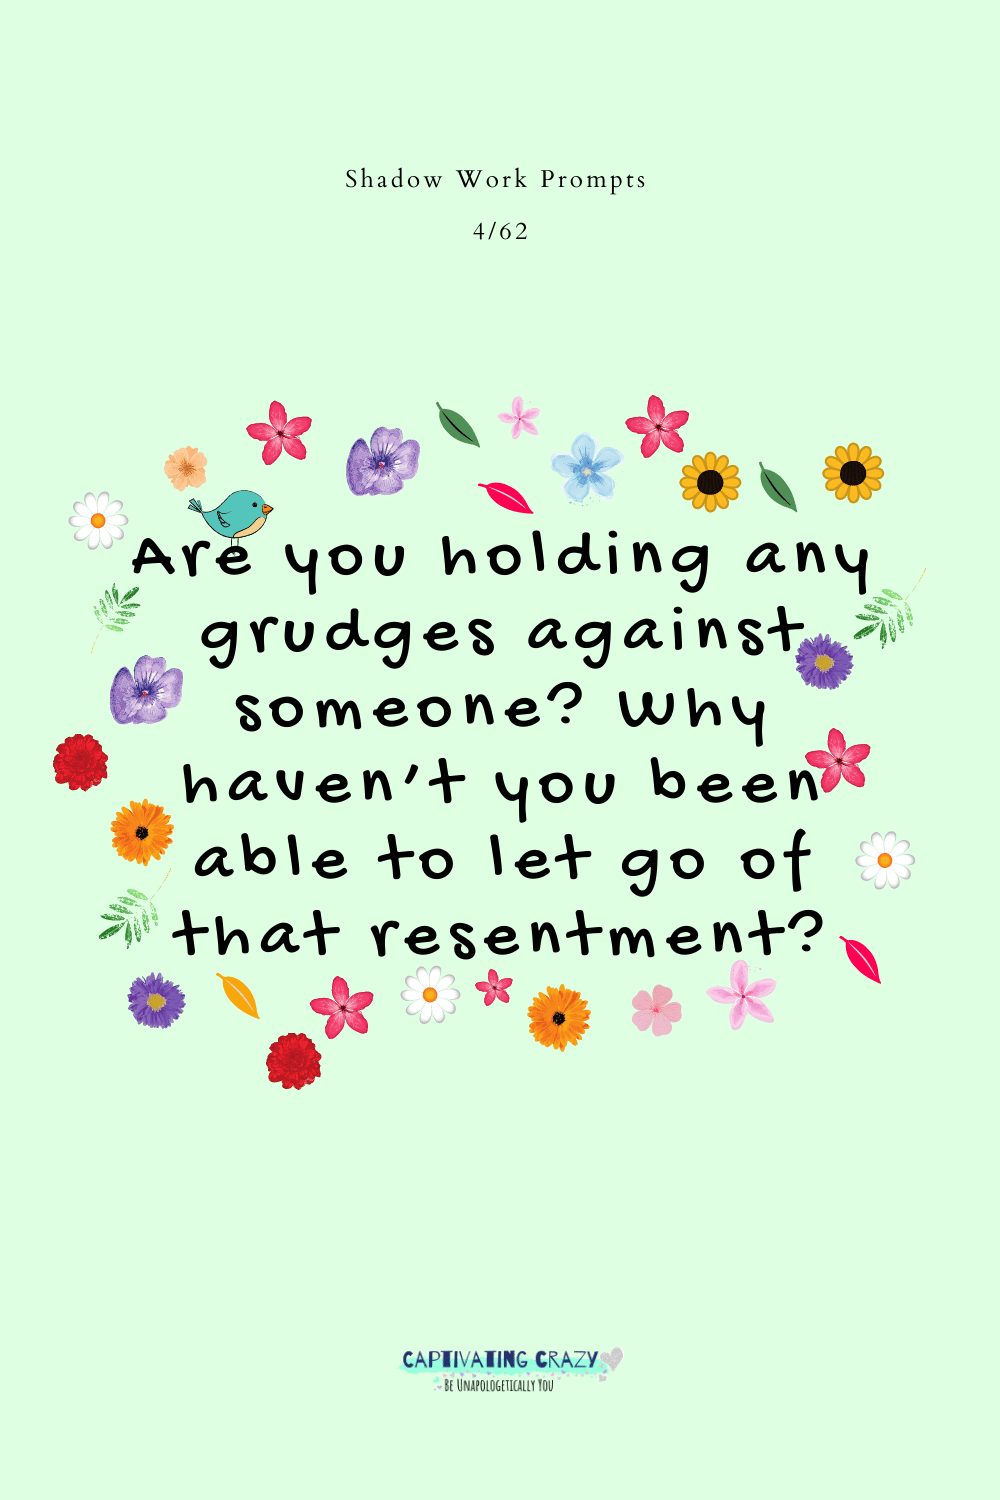 Are you holding any grudges against someone? Why haven't you been able to let go of that resentment?